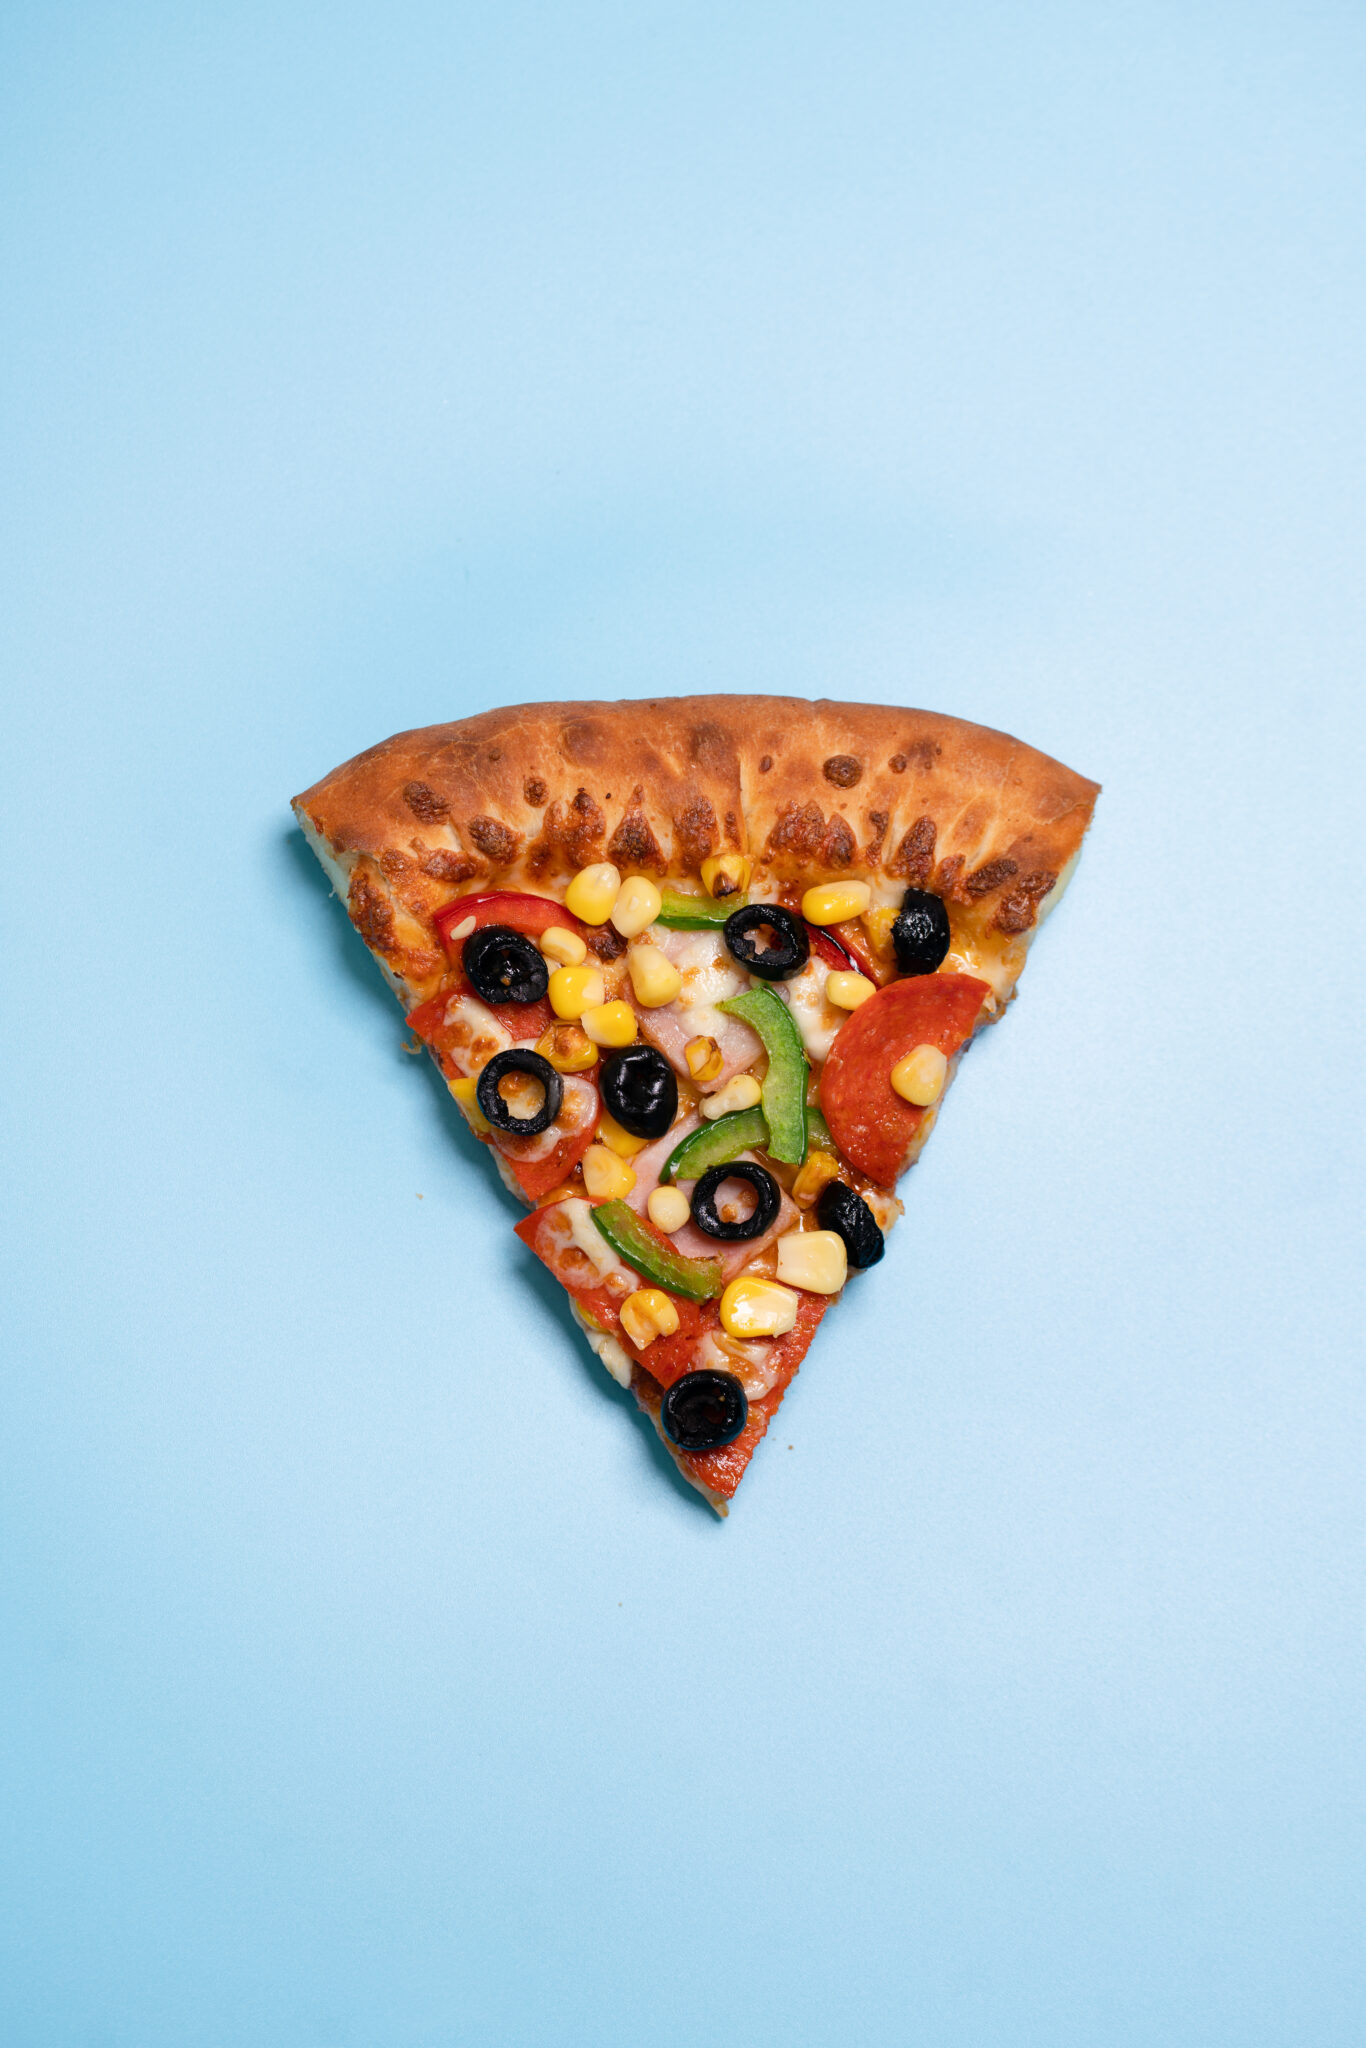 Commercial photo of slice of pizza against a blue background